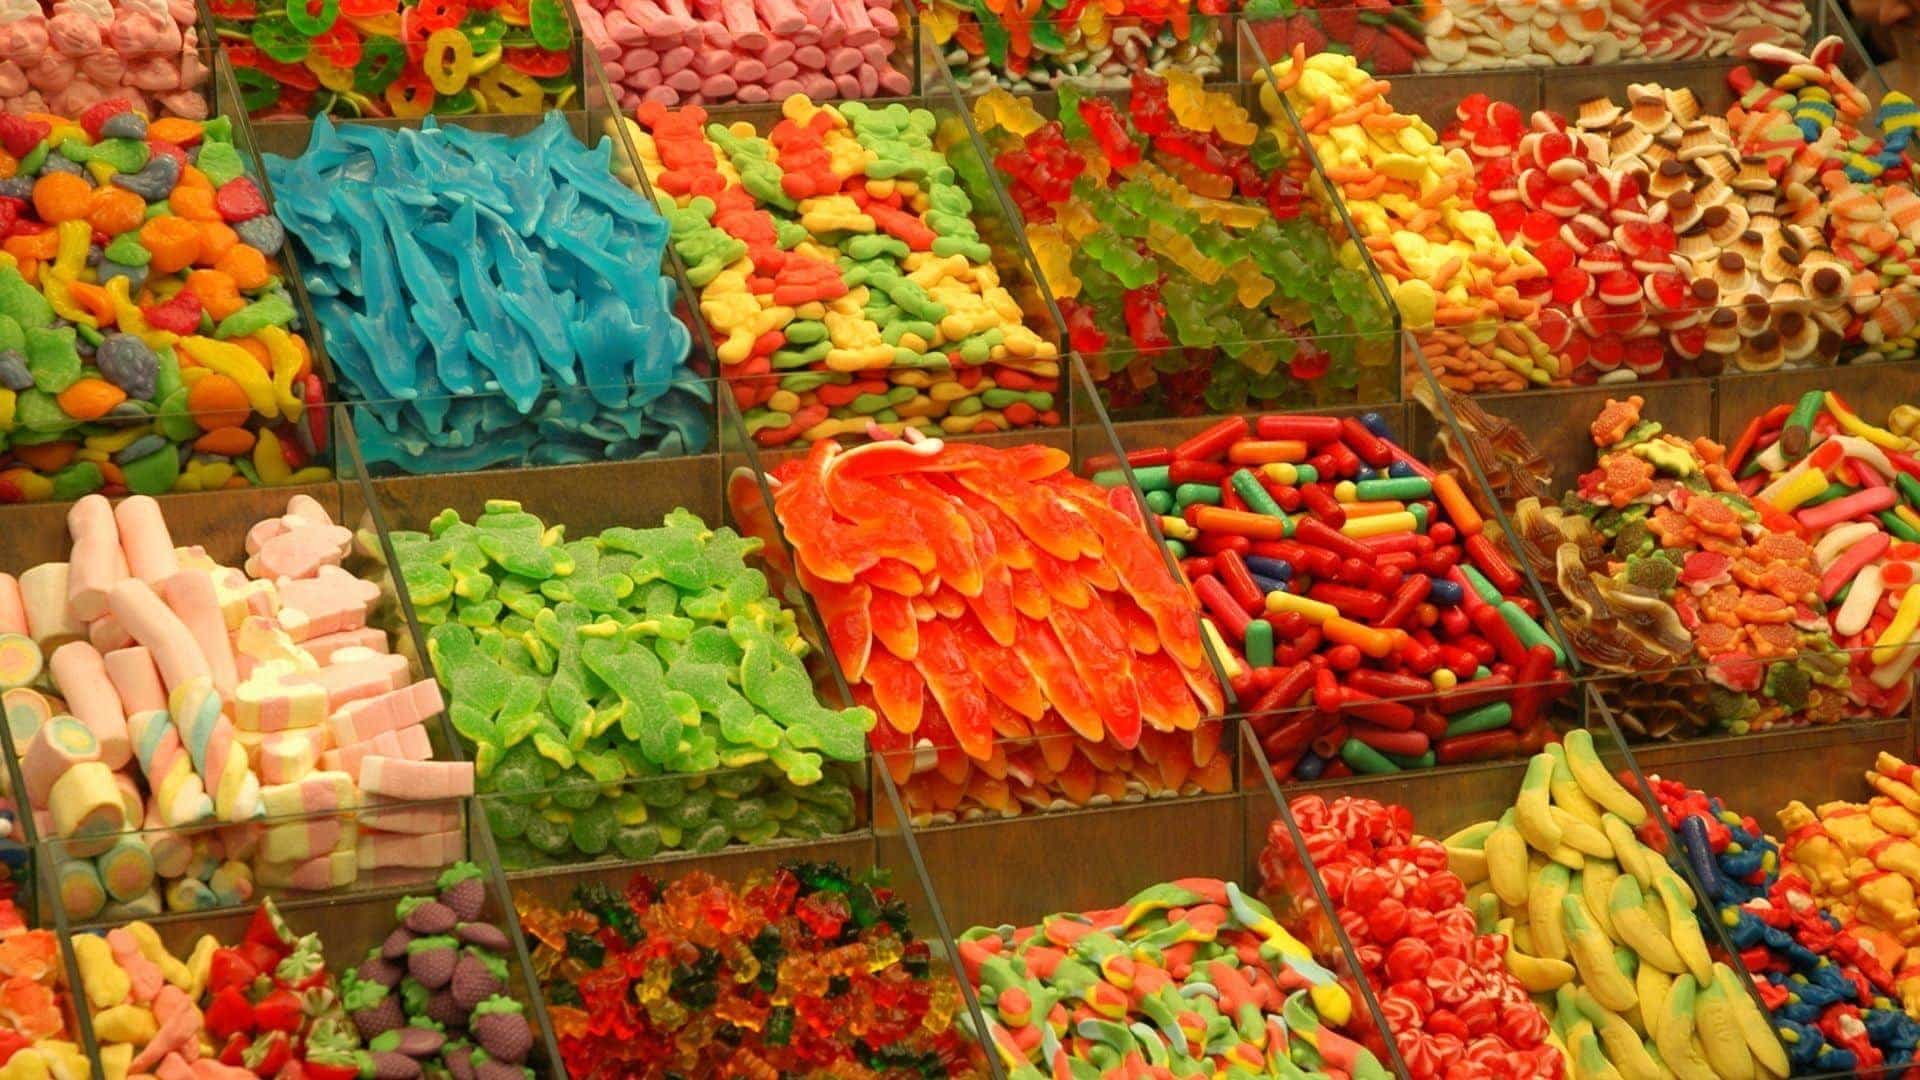 Candy Dream Interpretation - What Does It Mean to See Candy in a